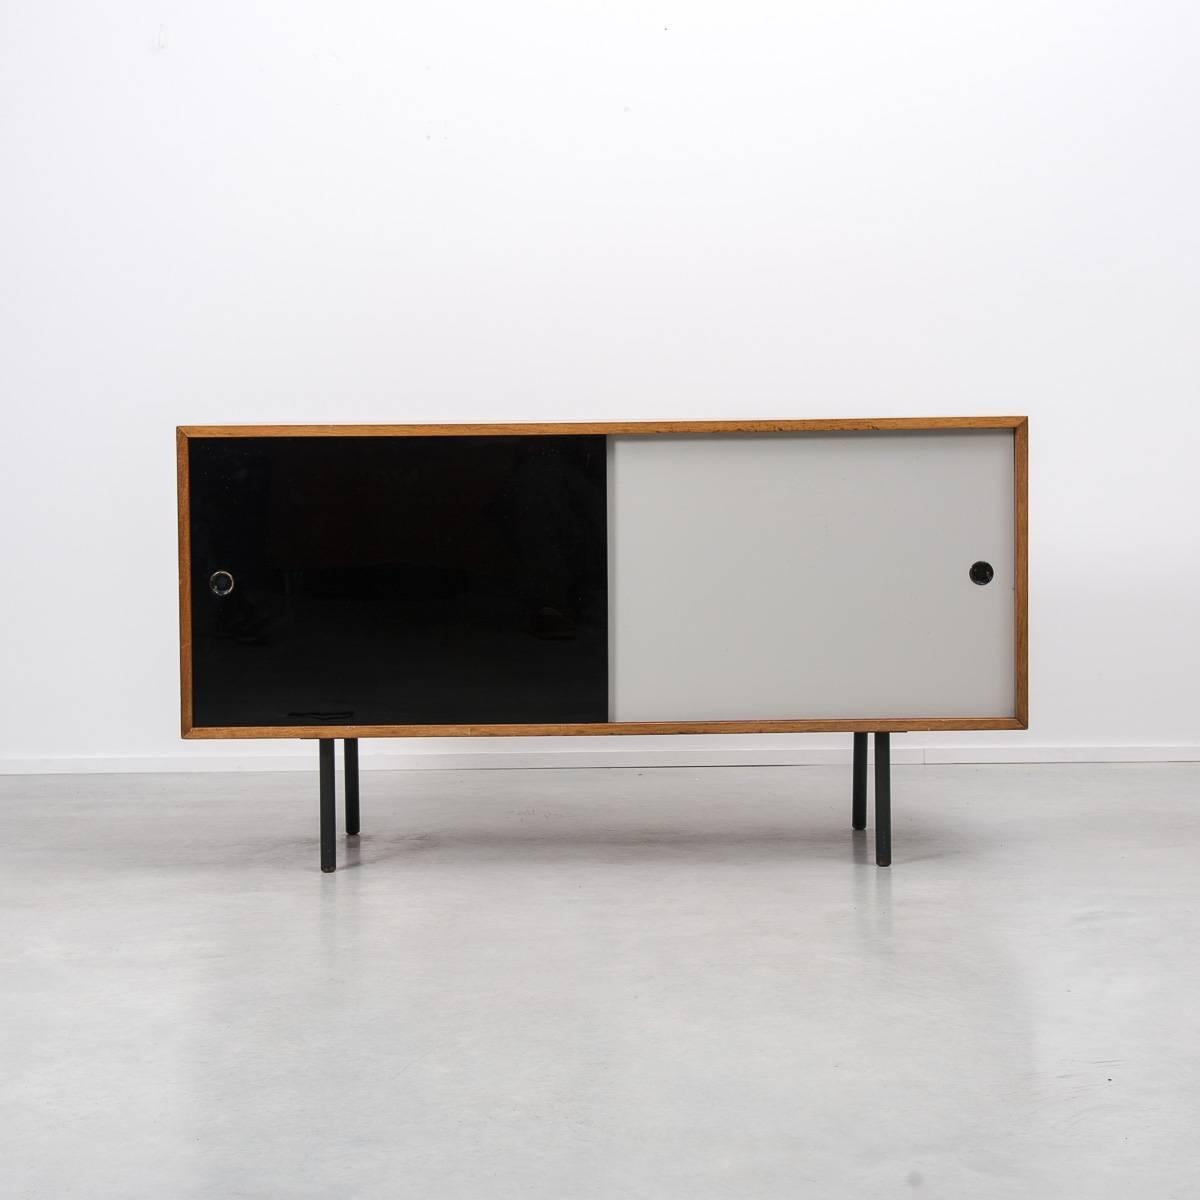 A glass and wood Robin Day sideboard designed for Hille, UK, 1950s.
The piece is from the Interplan range by the leading British furniture designer of the post war era. Vitrolite glass sliding doors sit inside a mahogany veneered cabinet which sits